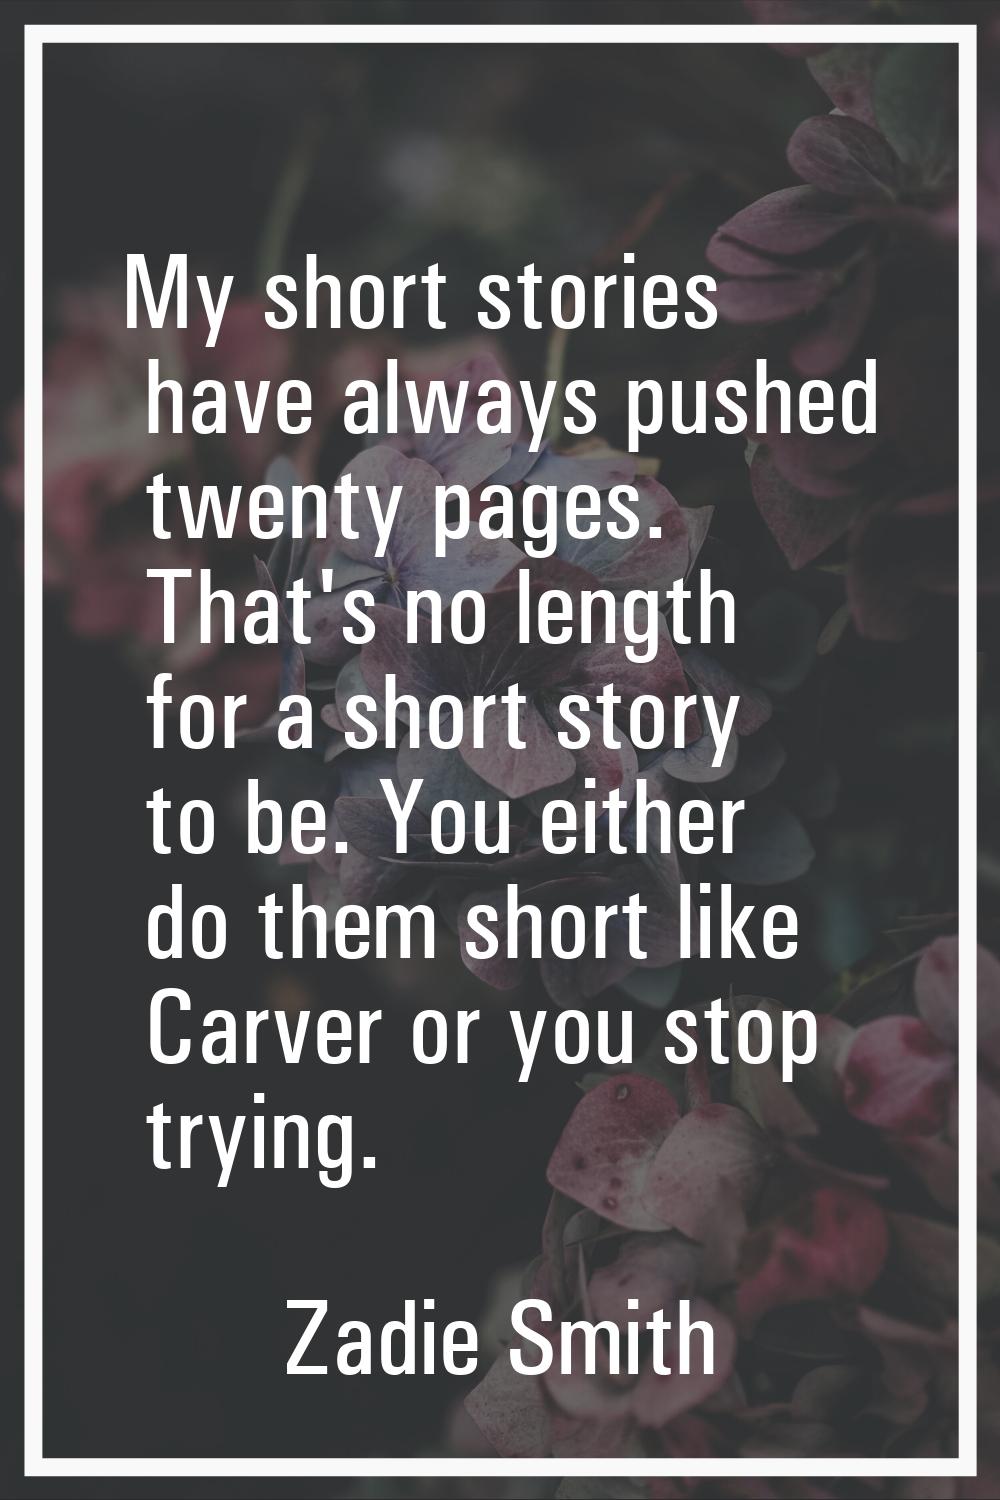 My short stories have always pushed twenty pages. That's no length for a short story to be. You eit